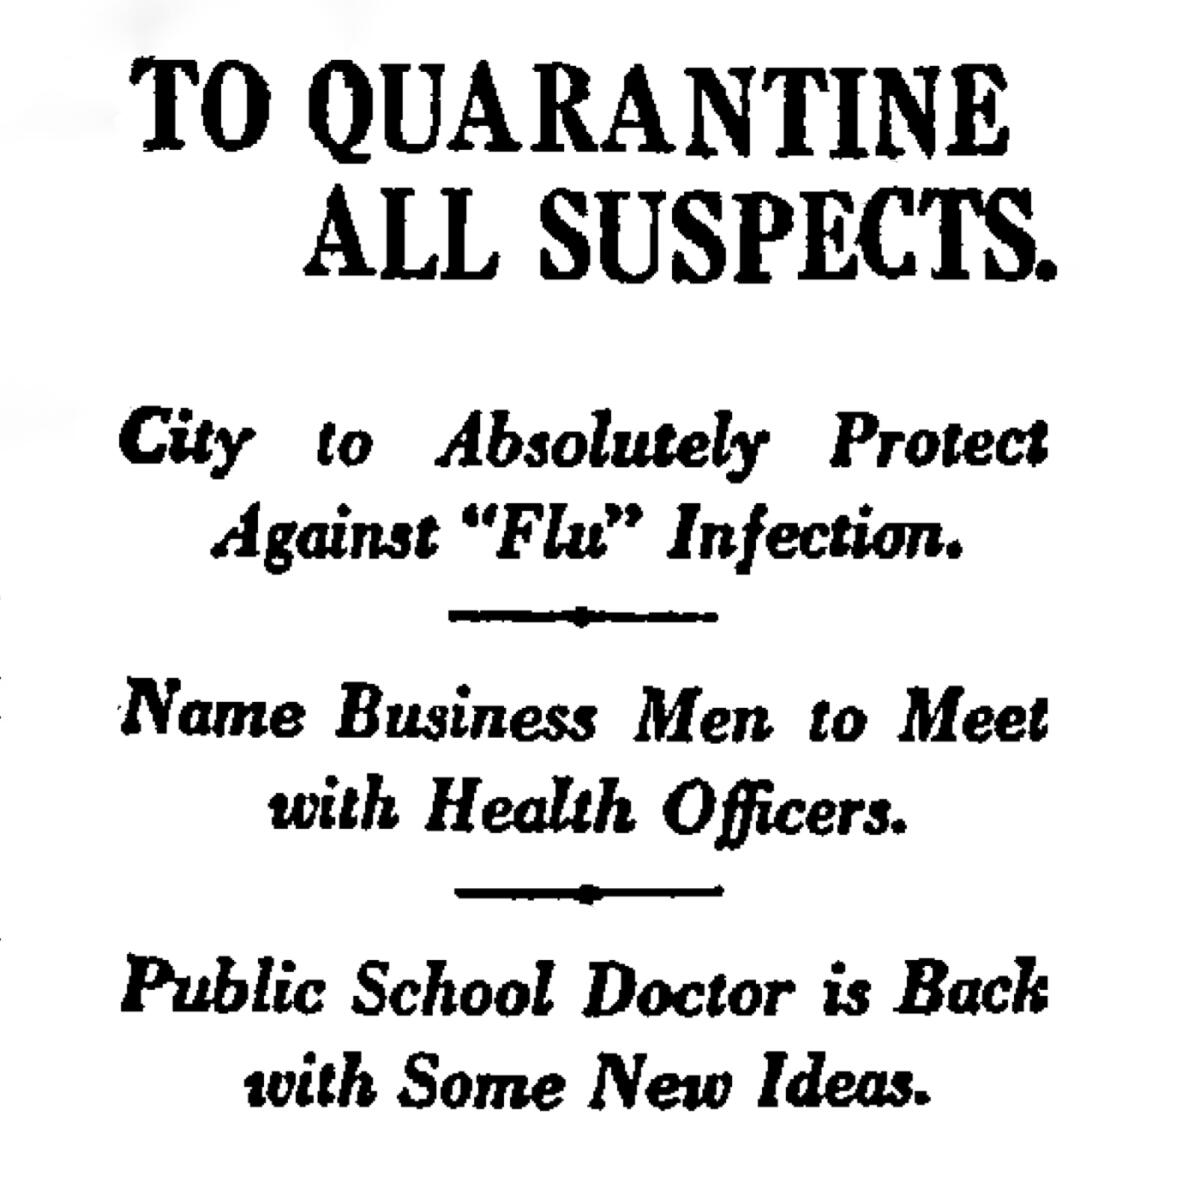 TO QUARANTINE ALL SUSPECTS.: City to Absolutely Protect Against "Flu" ... Los Angeles Times (1886-1922); Dec 12, 1918; ProQuest Historical Newspapers: Los Angeles Times pg. II1